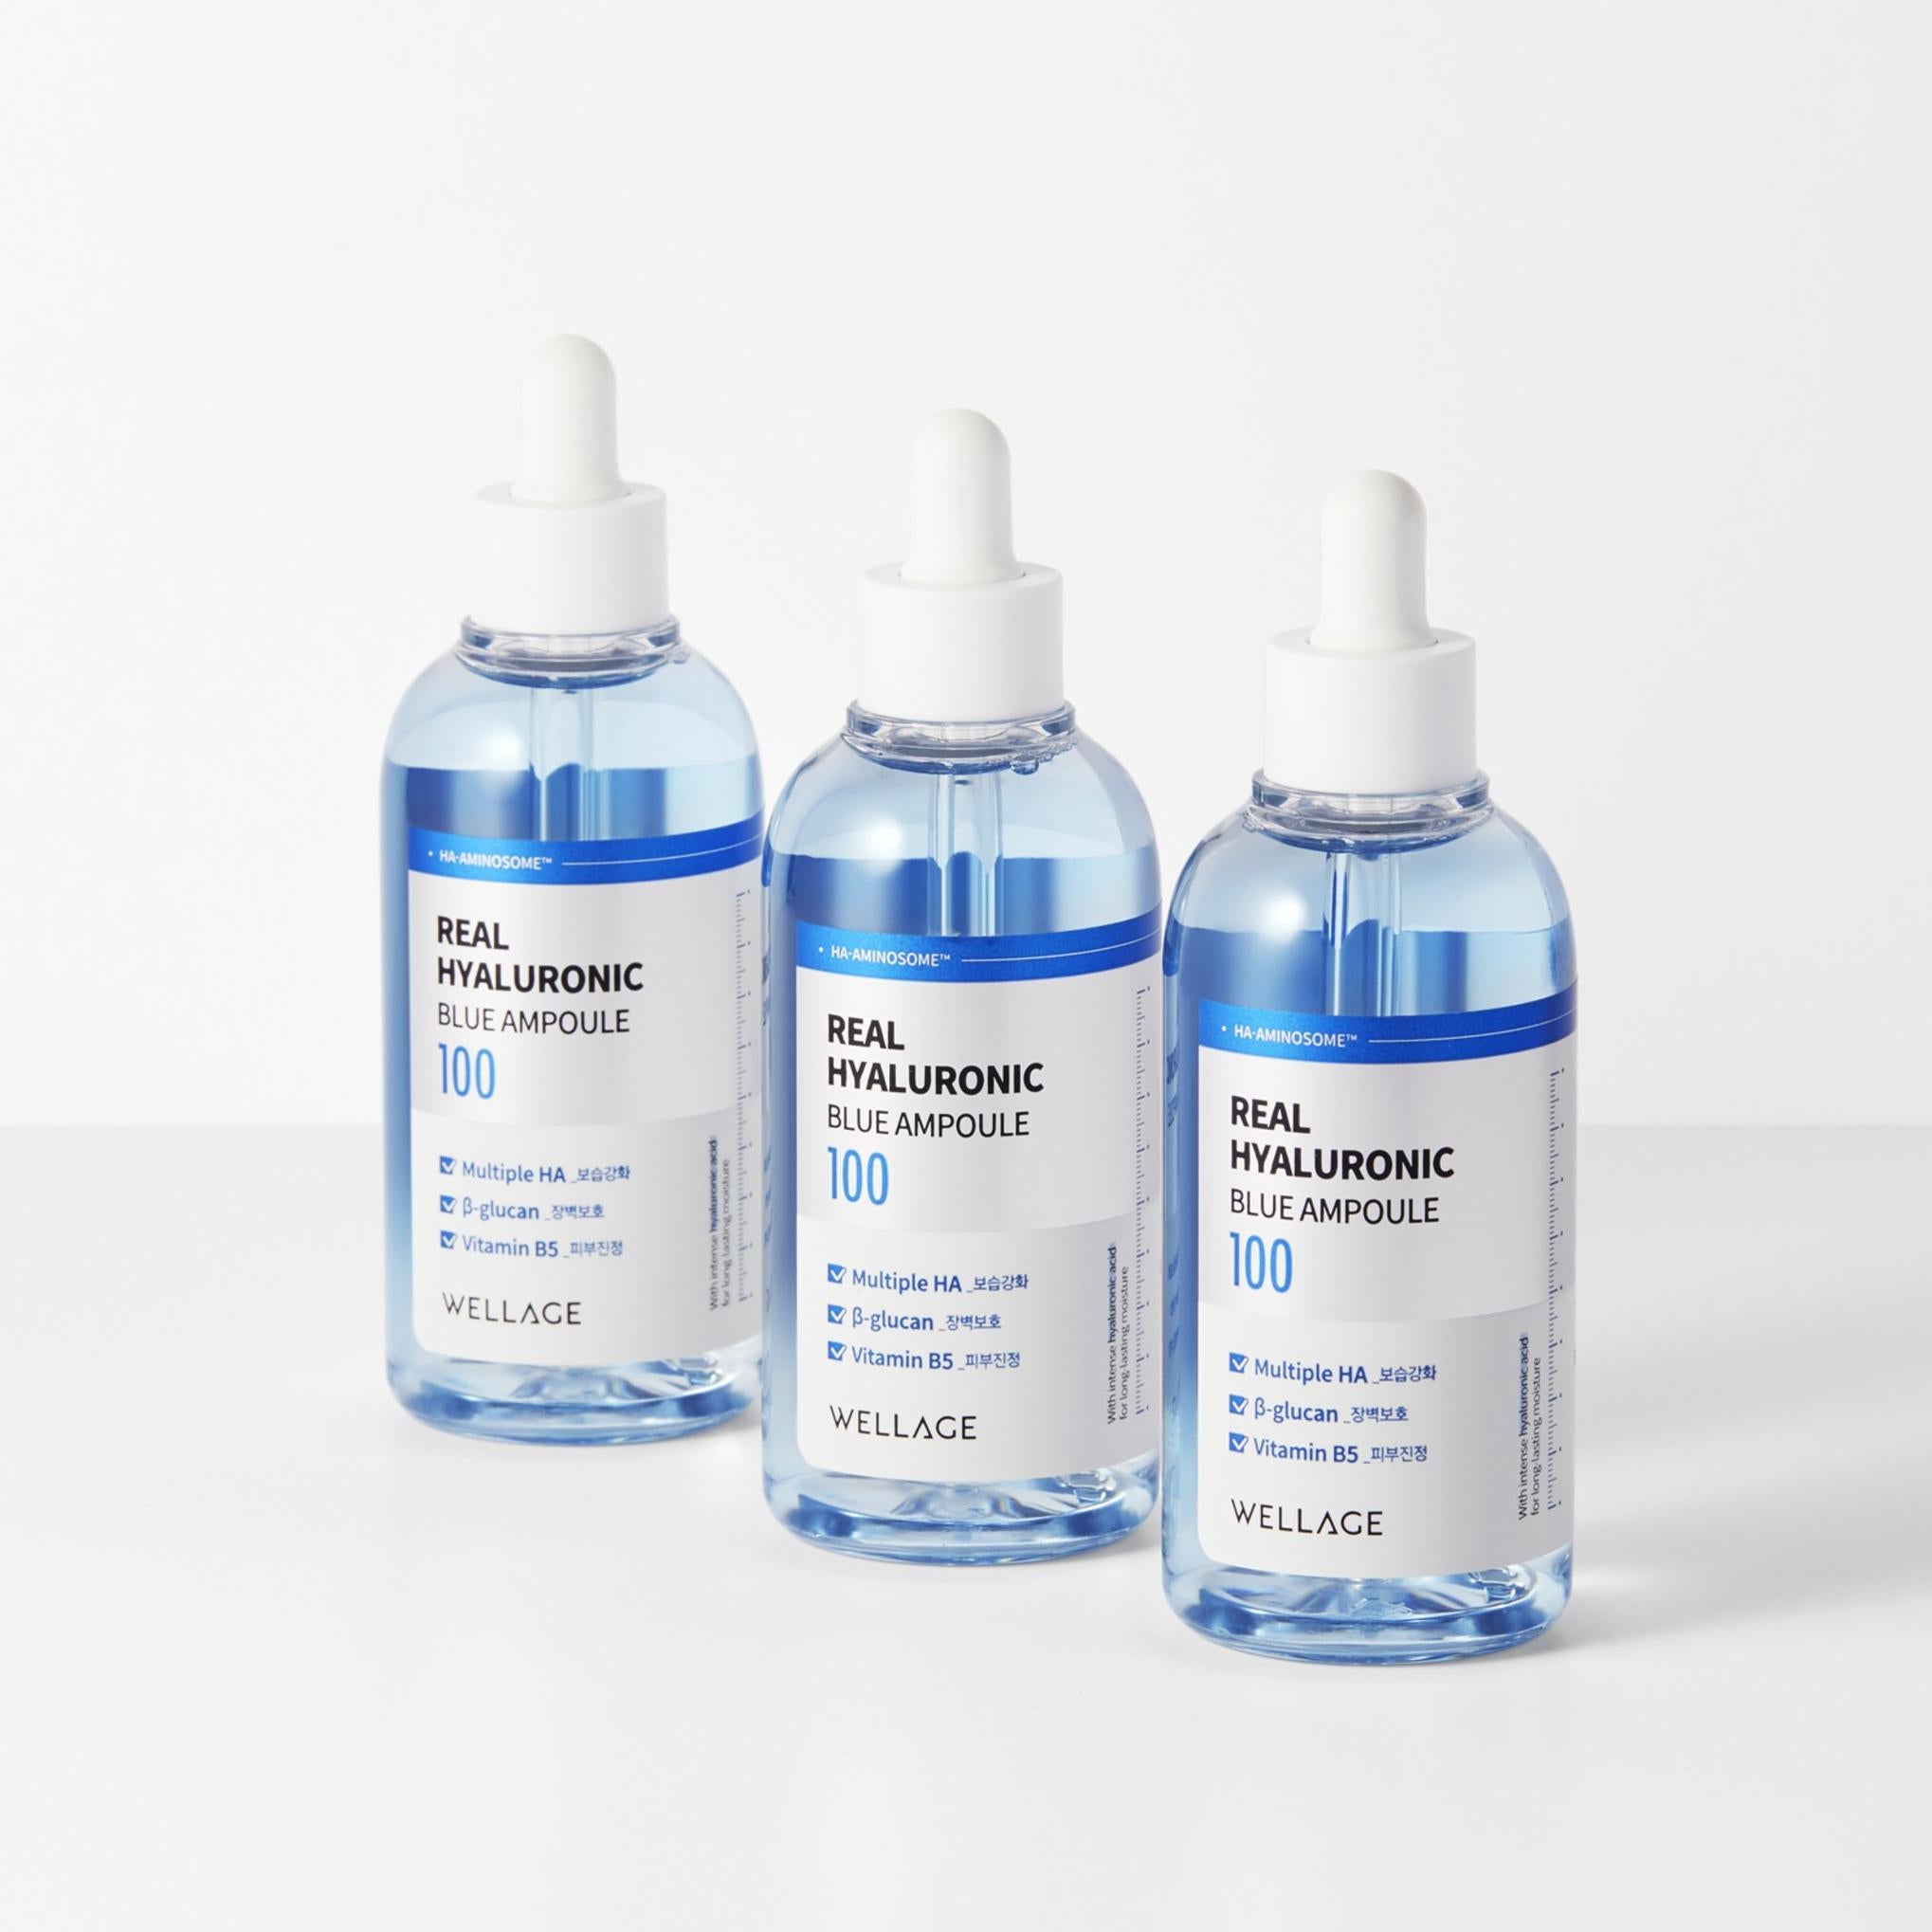 Wellage Real Hyaluronic Blue 100 Ampoule 100ml + 75ml Set